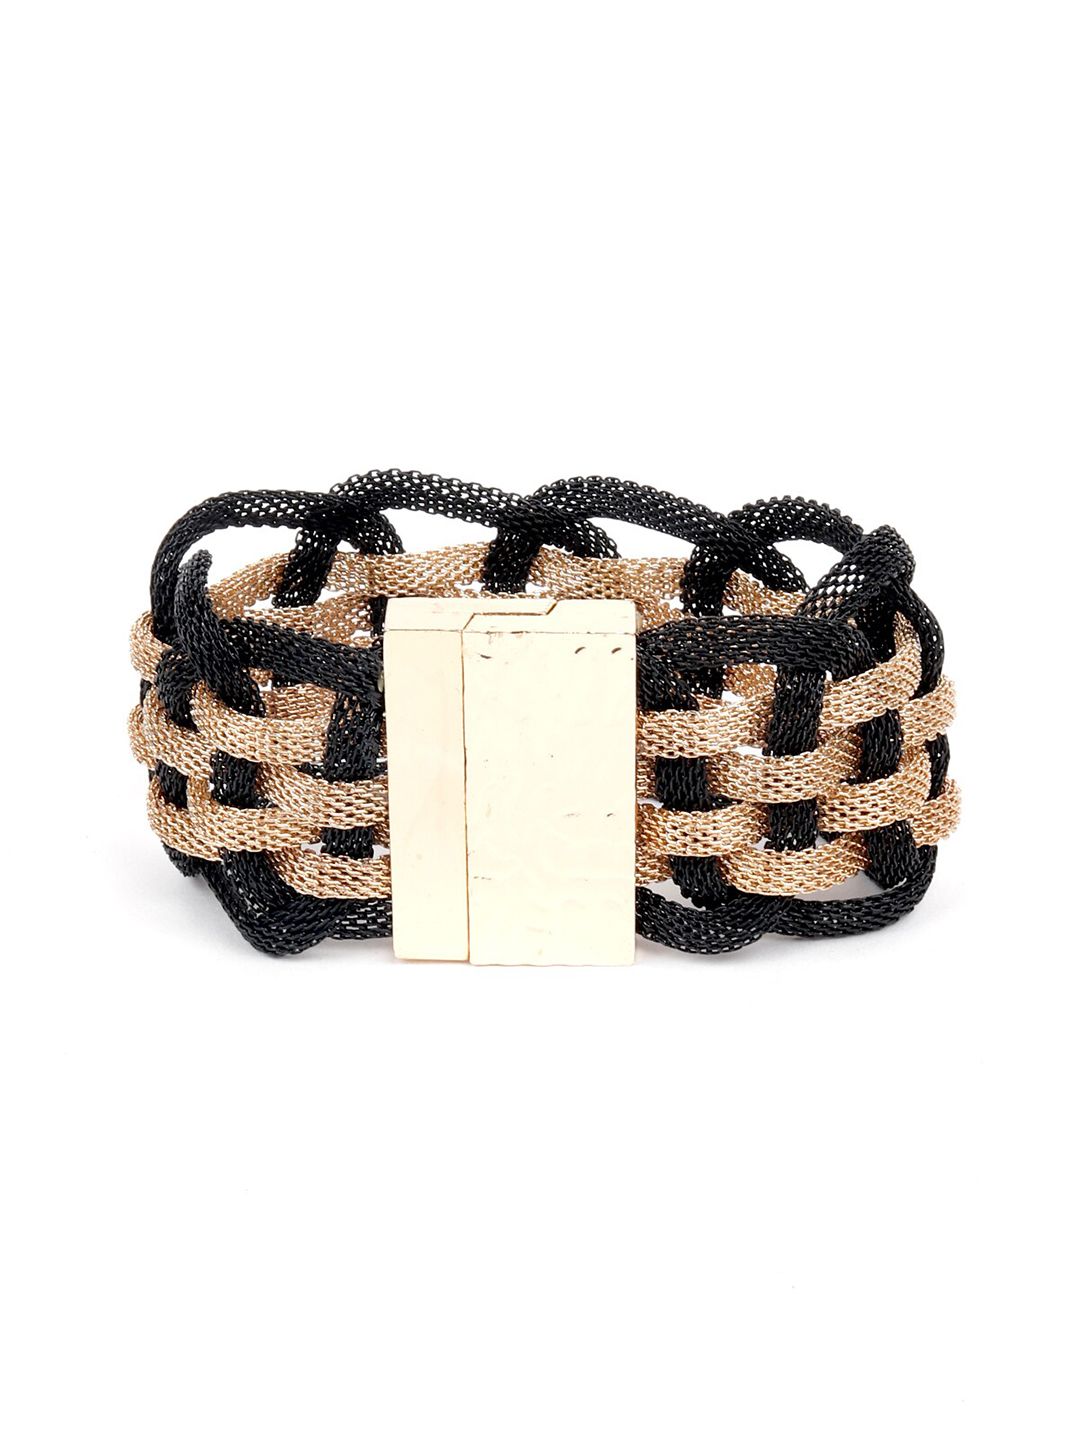 ODETTE Women Beige & Black Leather Gold-Plated Cuff Bracelet Price in India